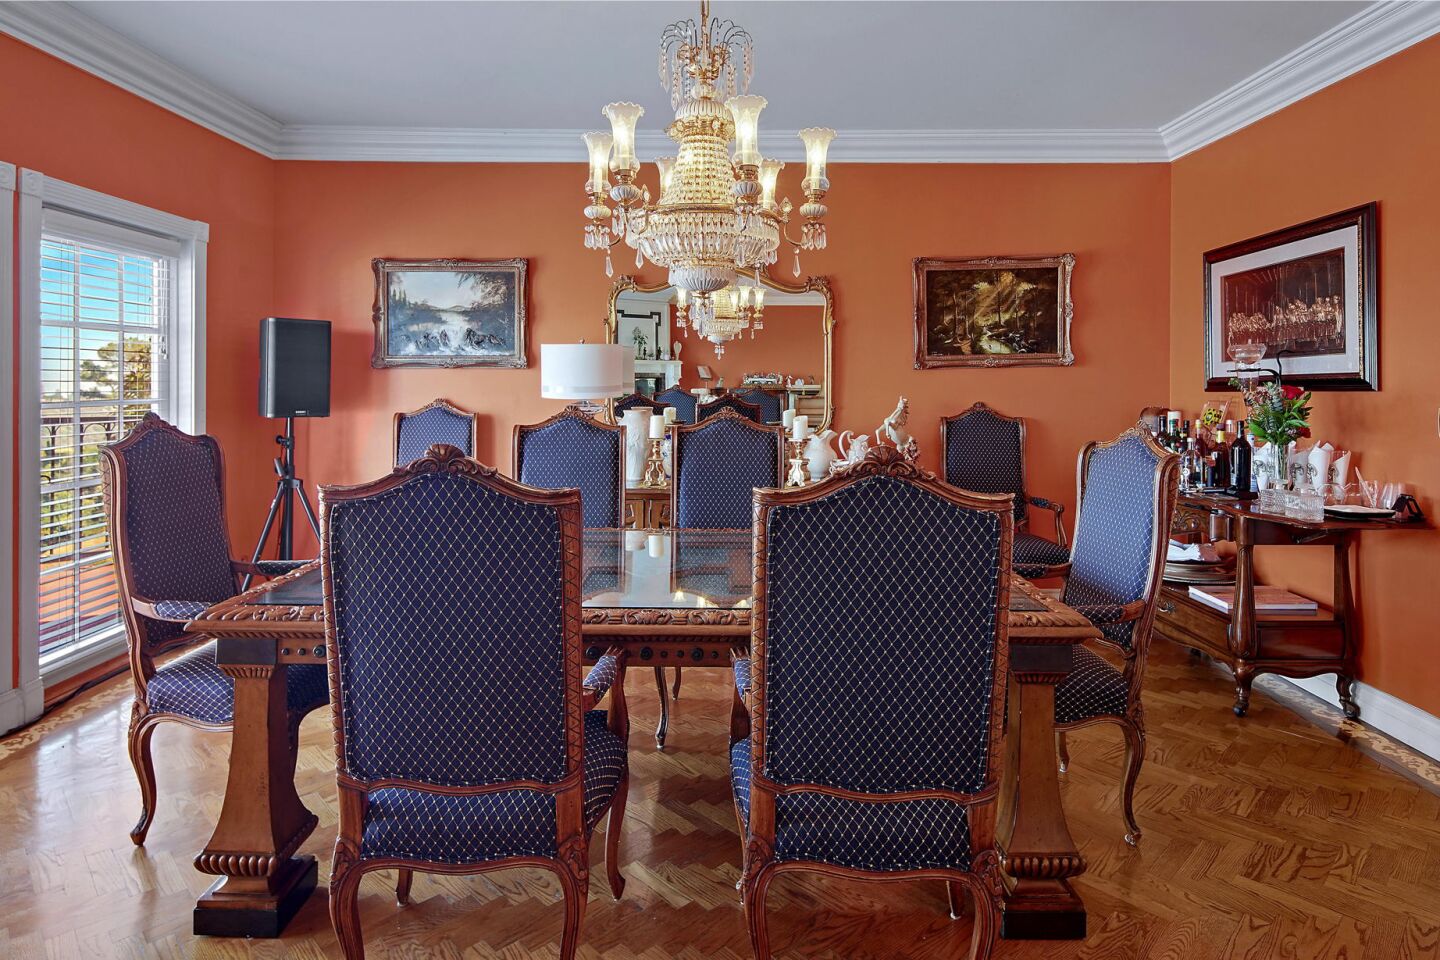 The dining room has orange walls and a dining table and chairs overlooking a window.